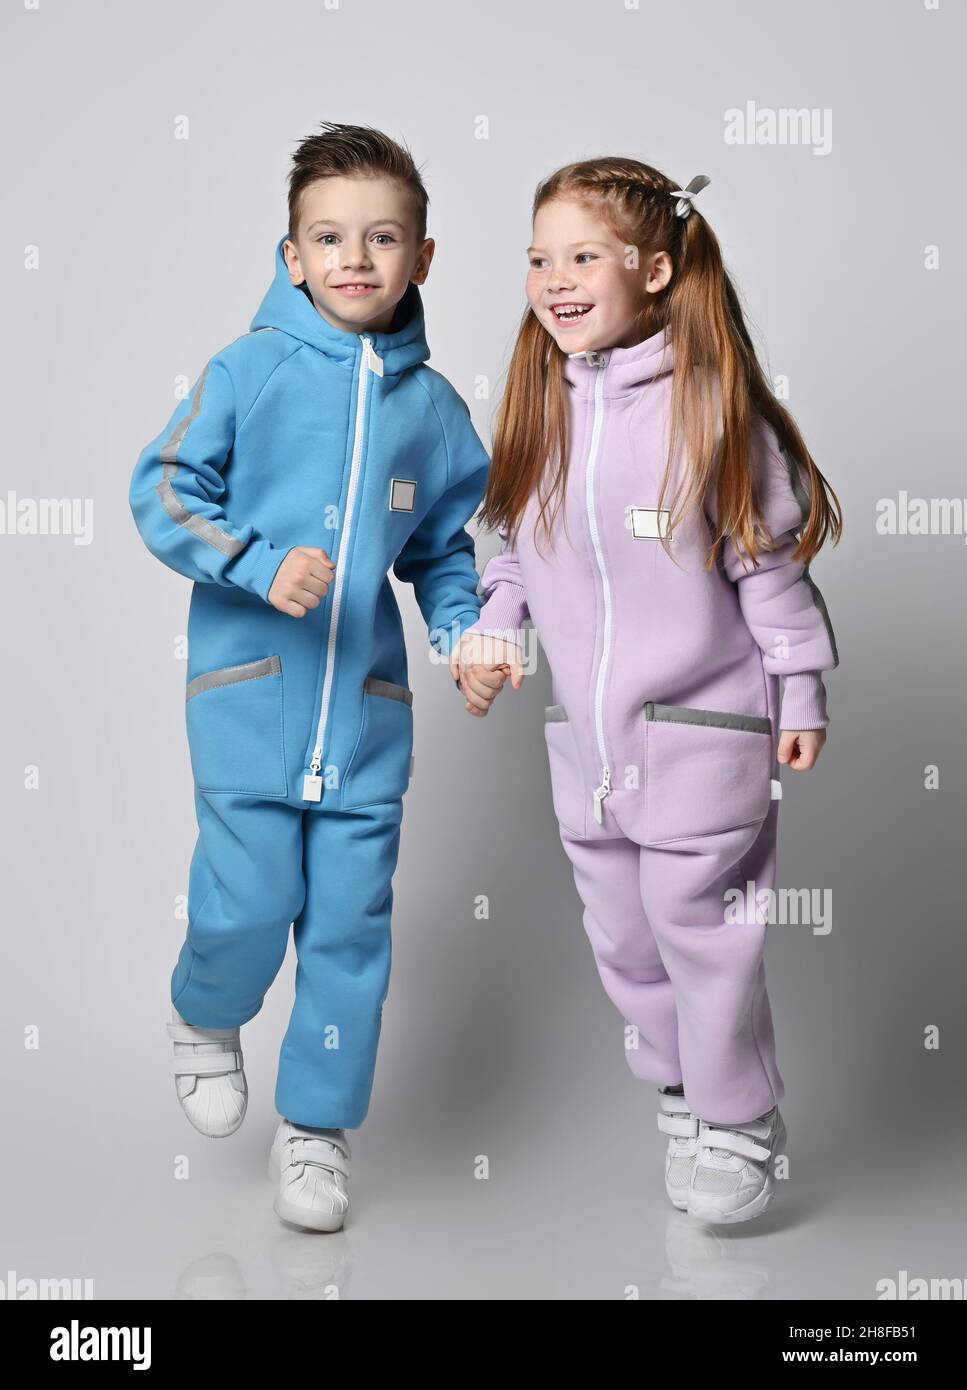 Happy active kids boy and girl in modern blue and pink jumpsuits play and walk together, having fun Stock Photo